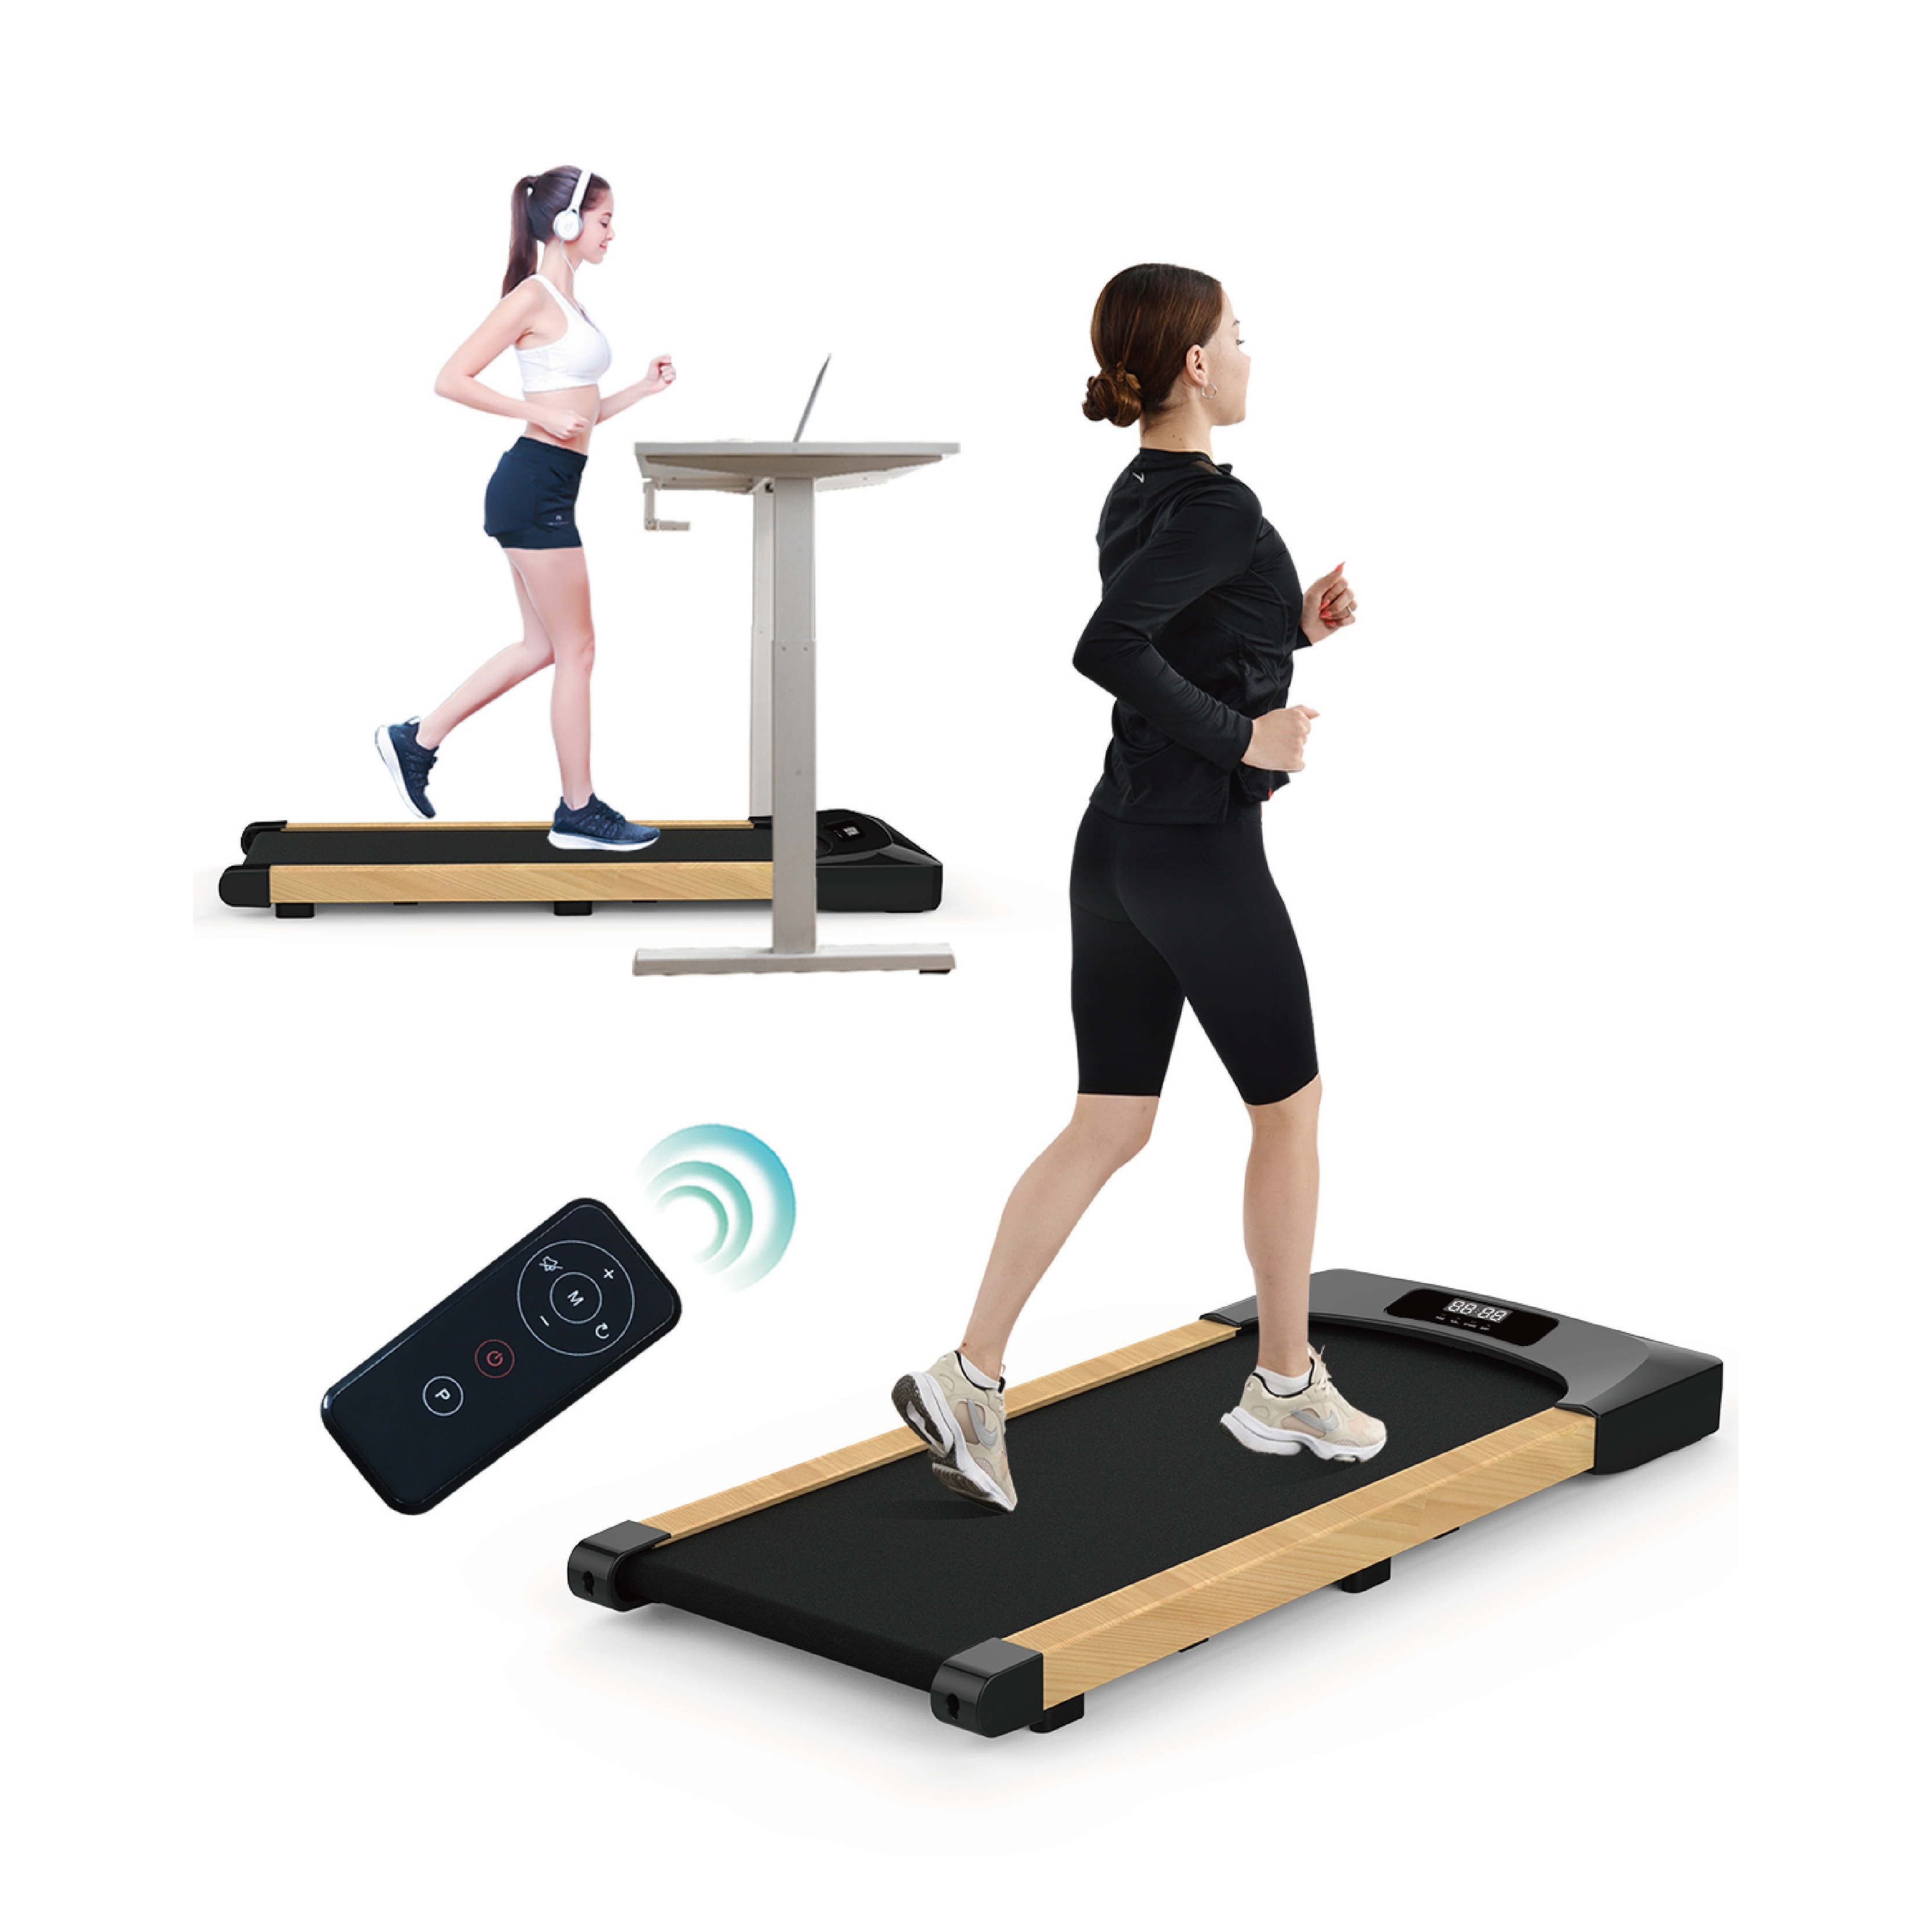  Walking Pad 2 in 1 Under Desk Treadmill, 2.5HP Low Noise Walking  Pad Running Jogging Machine with Remote Control for Home Office,  Lightweight Portable Desk Treadmill Installation Free : Sports & Outdoors